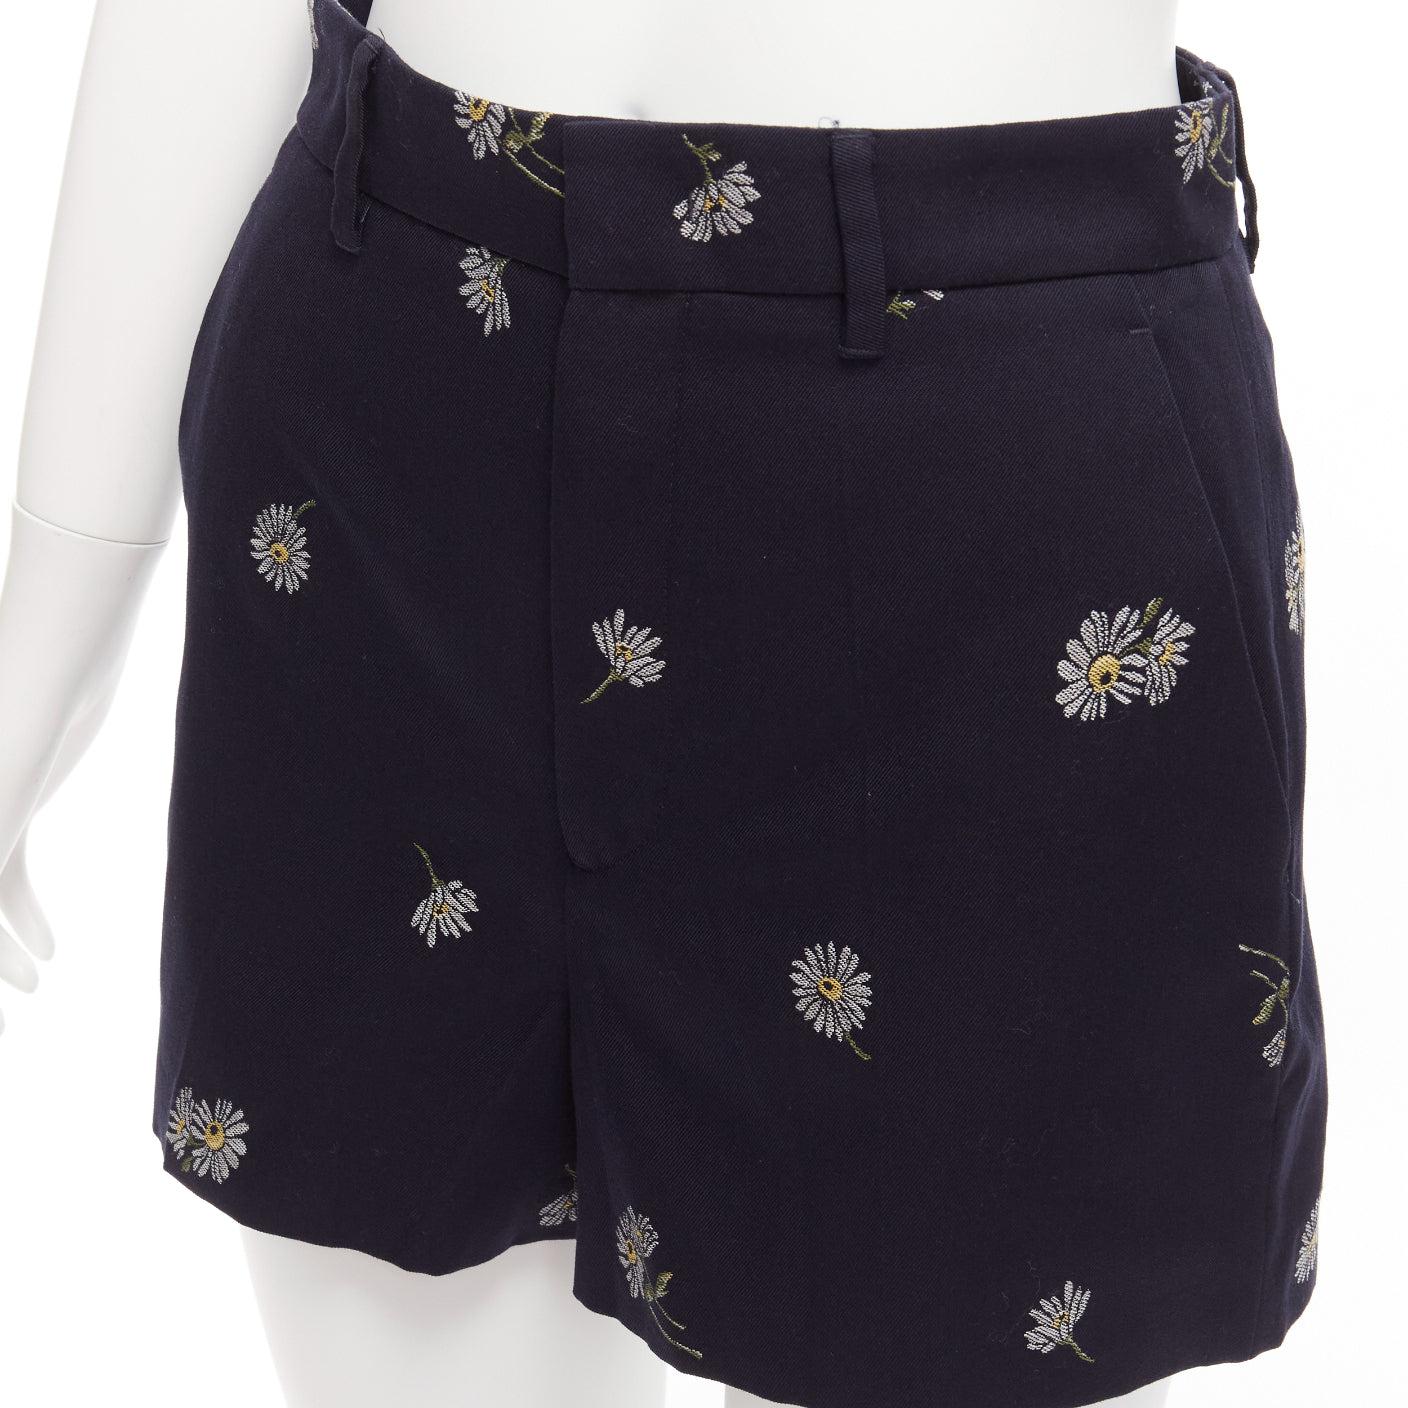 RED VALENTINO navy cotton daisy floral print high waisted shorts IT36 S
Reference: AAWC/A00867
Brand: Red Valentino
Material: Cotton
Color: Navy, White
Pattern: Floral
Closure: Zip Fly
Lining: Navy Fabric
Extra Details: Darted back.
Made in: